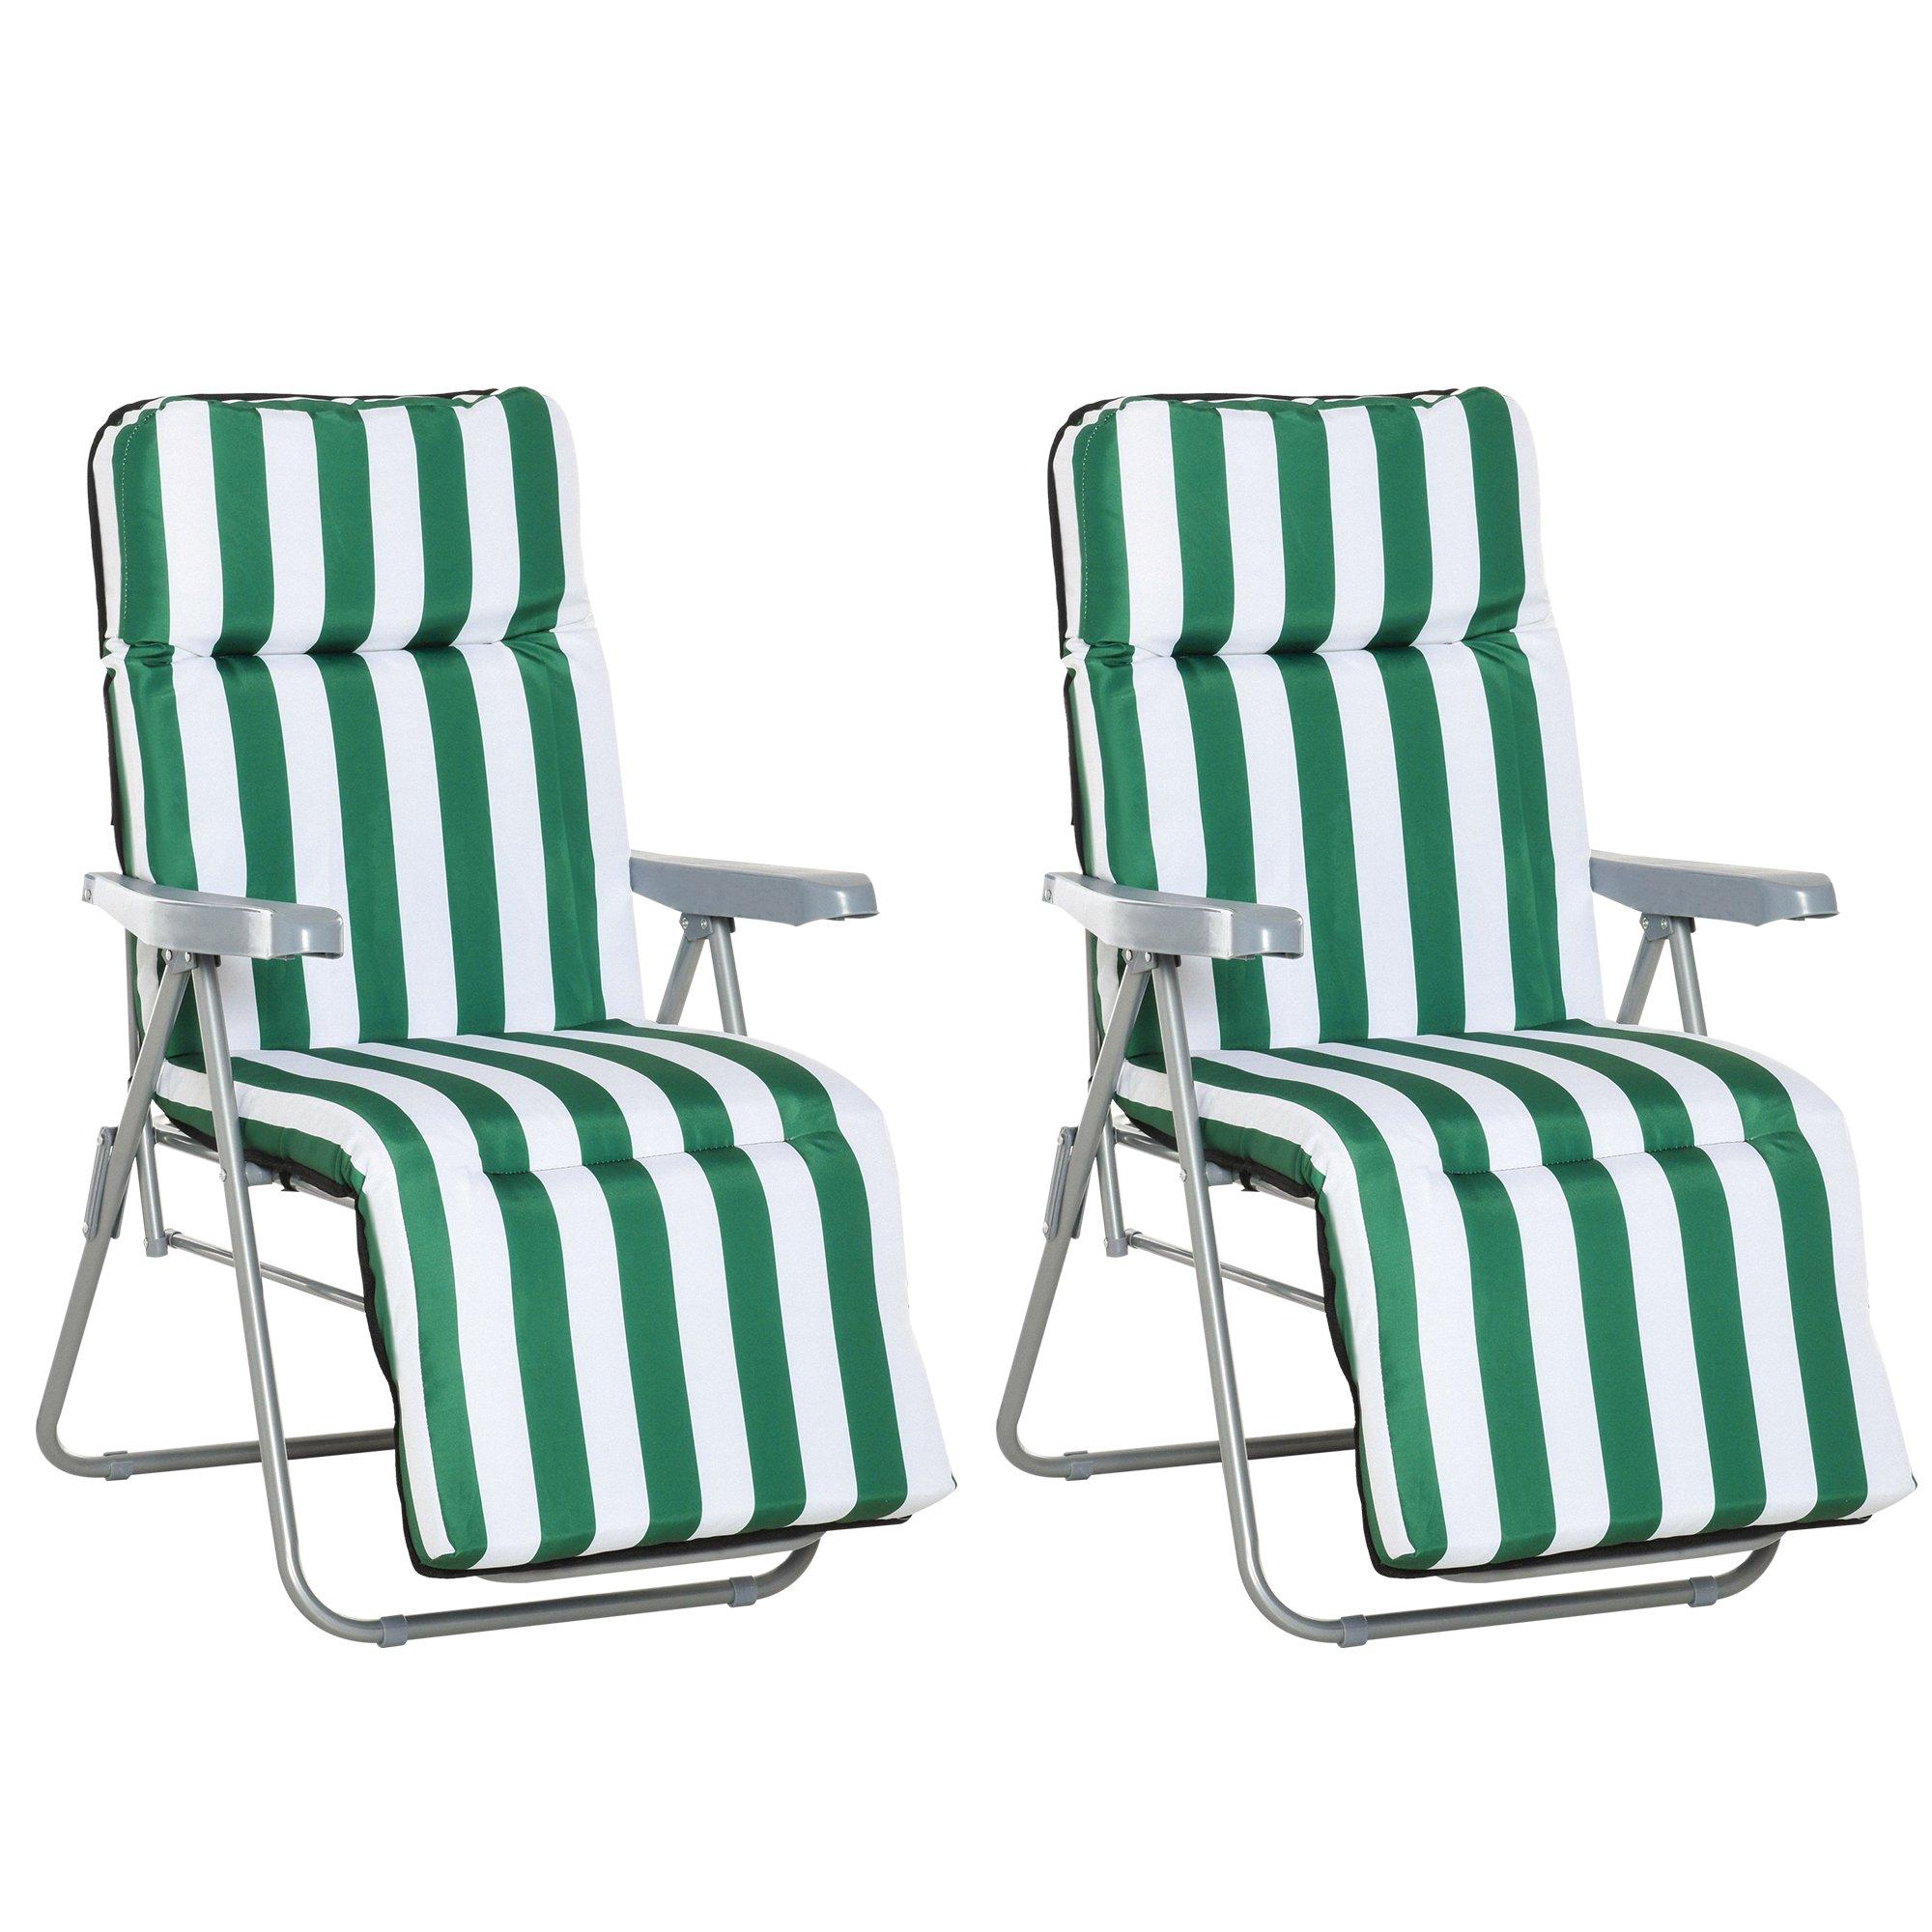 Set of 2 Folding Sun Lounger Recliner Chairs Daybed Cushion